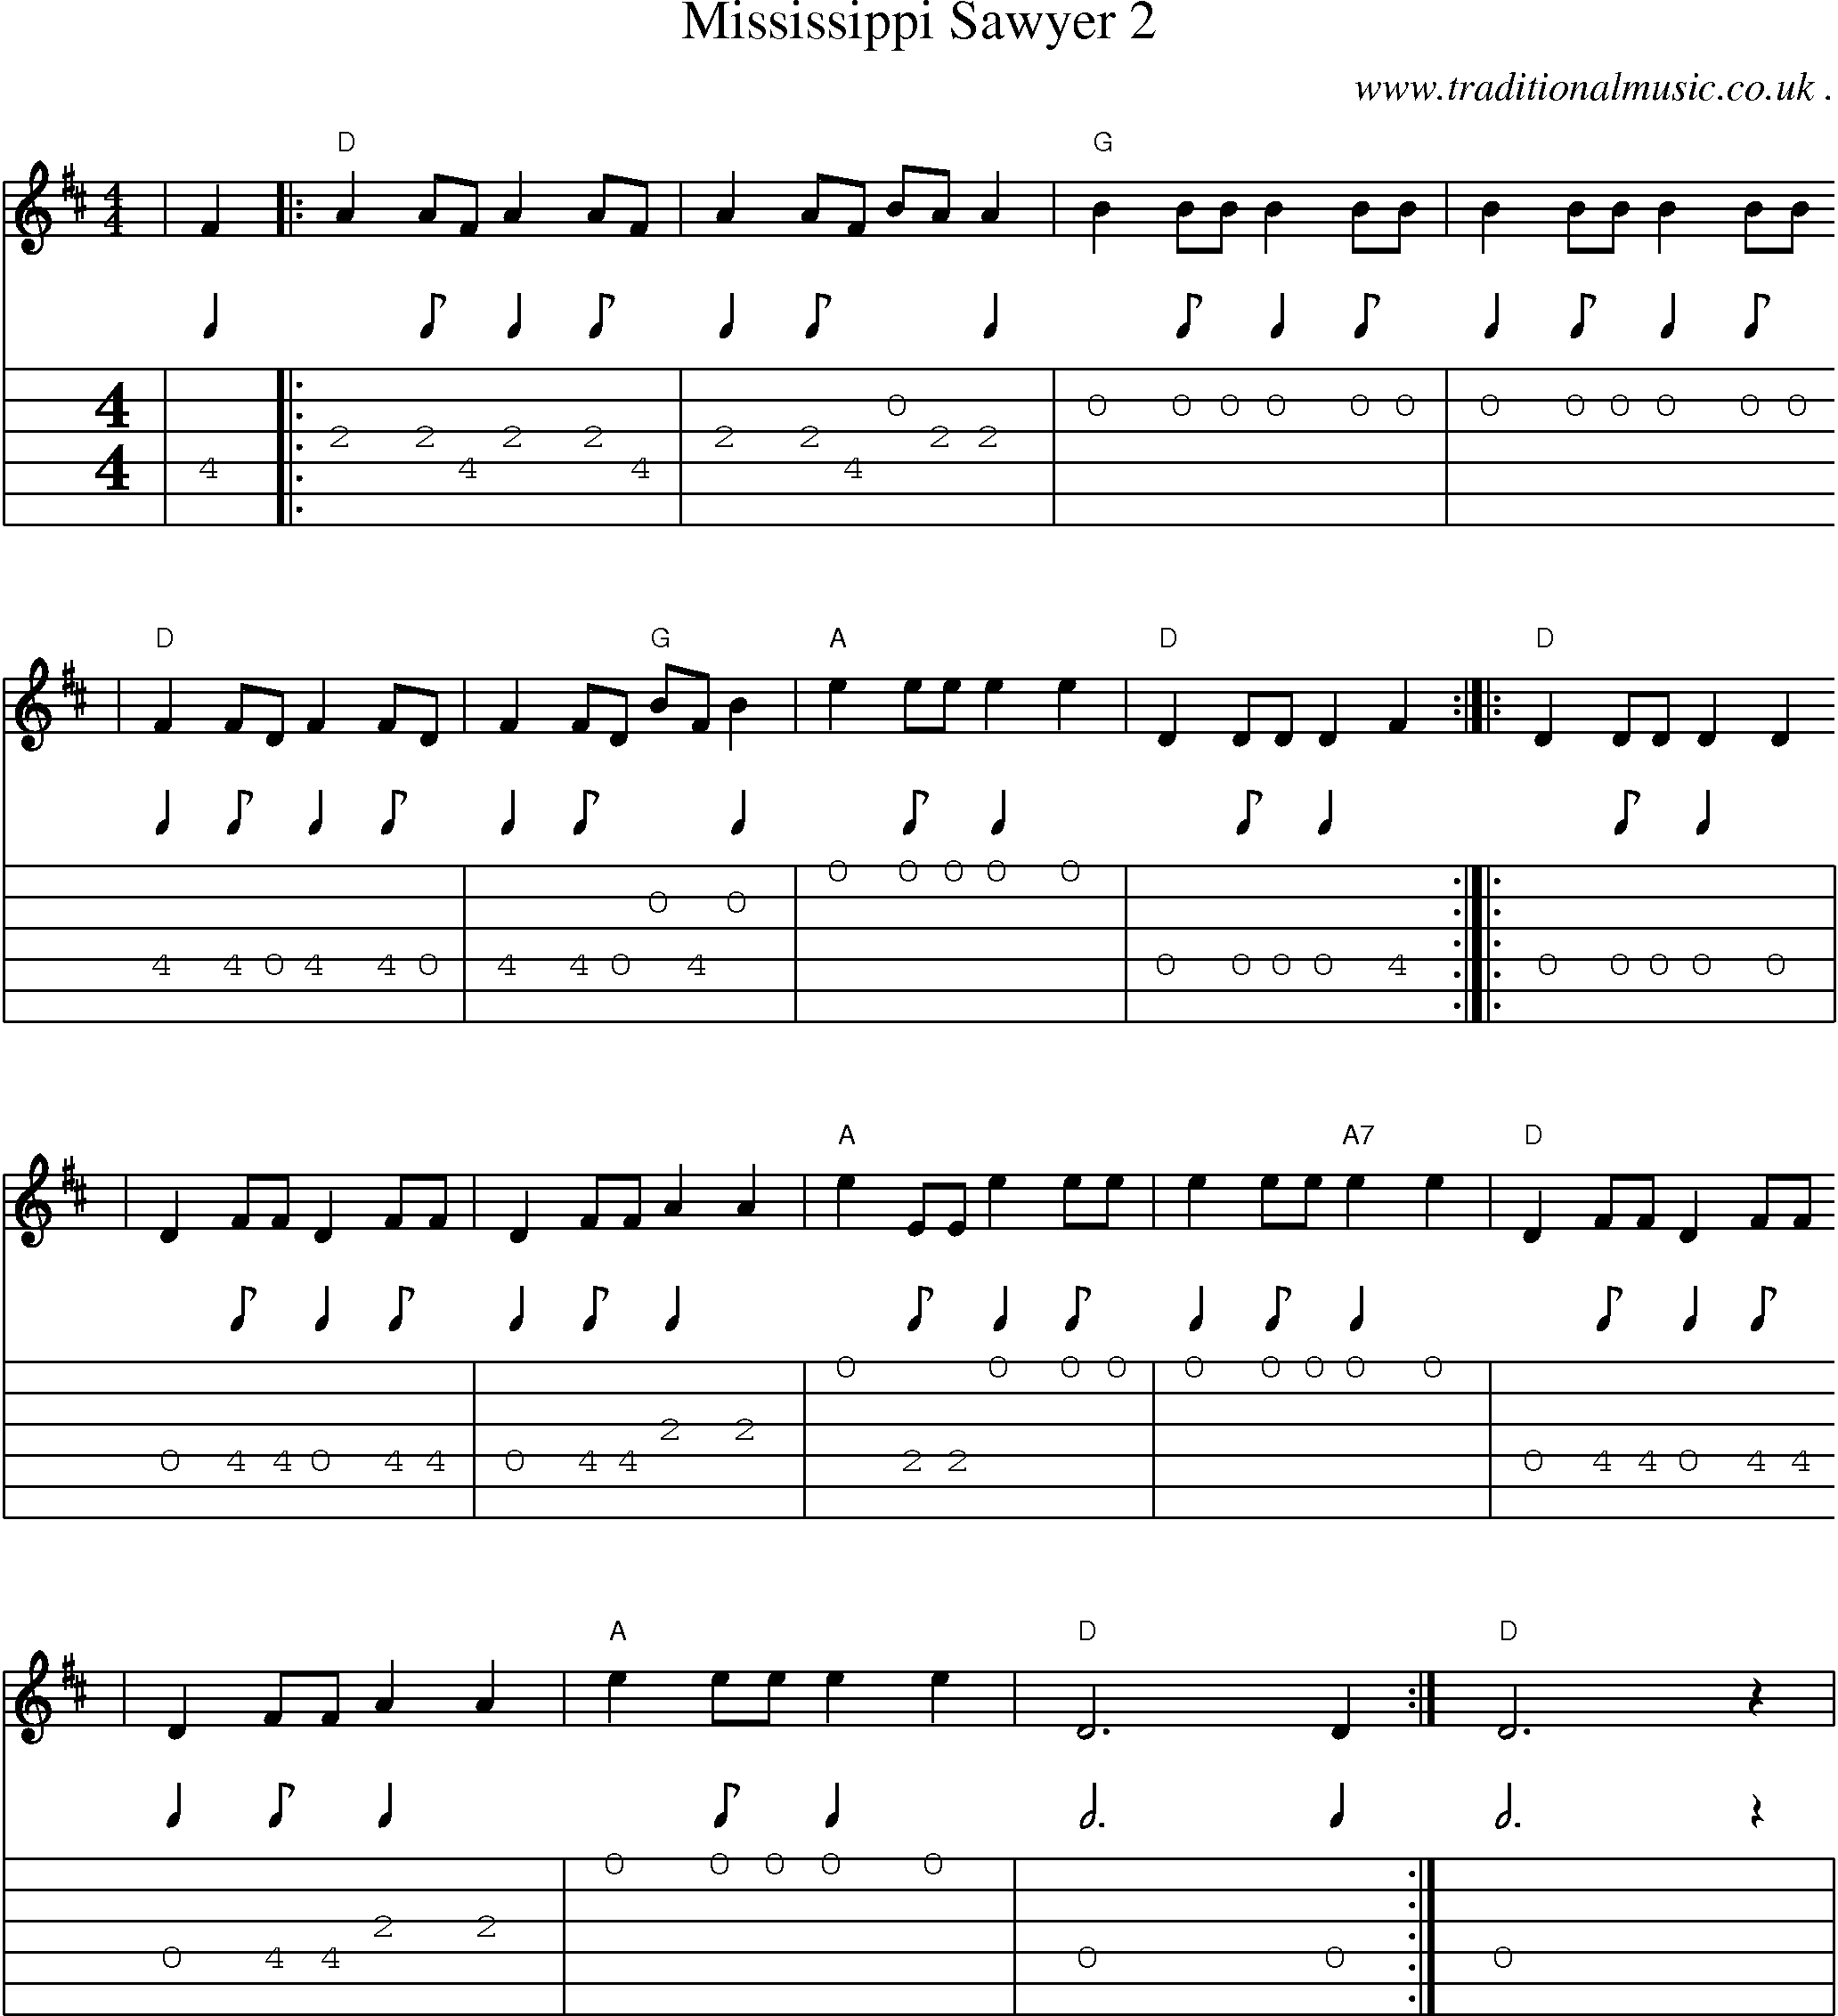 Music Score and Guitar Tabs for Mississippi Sawyer 2